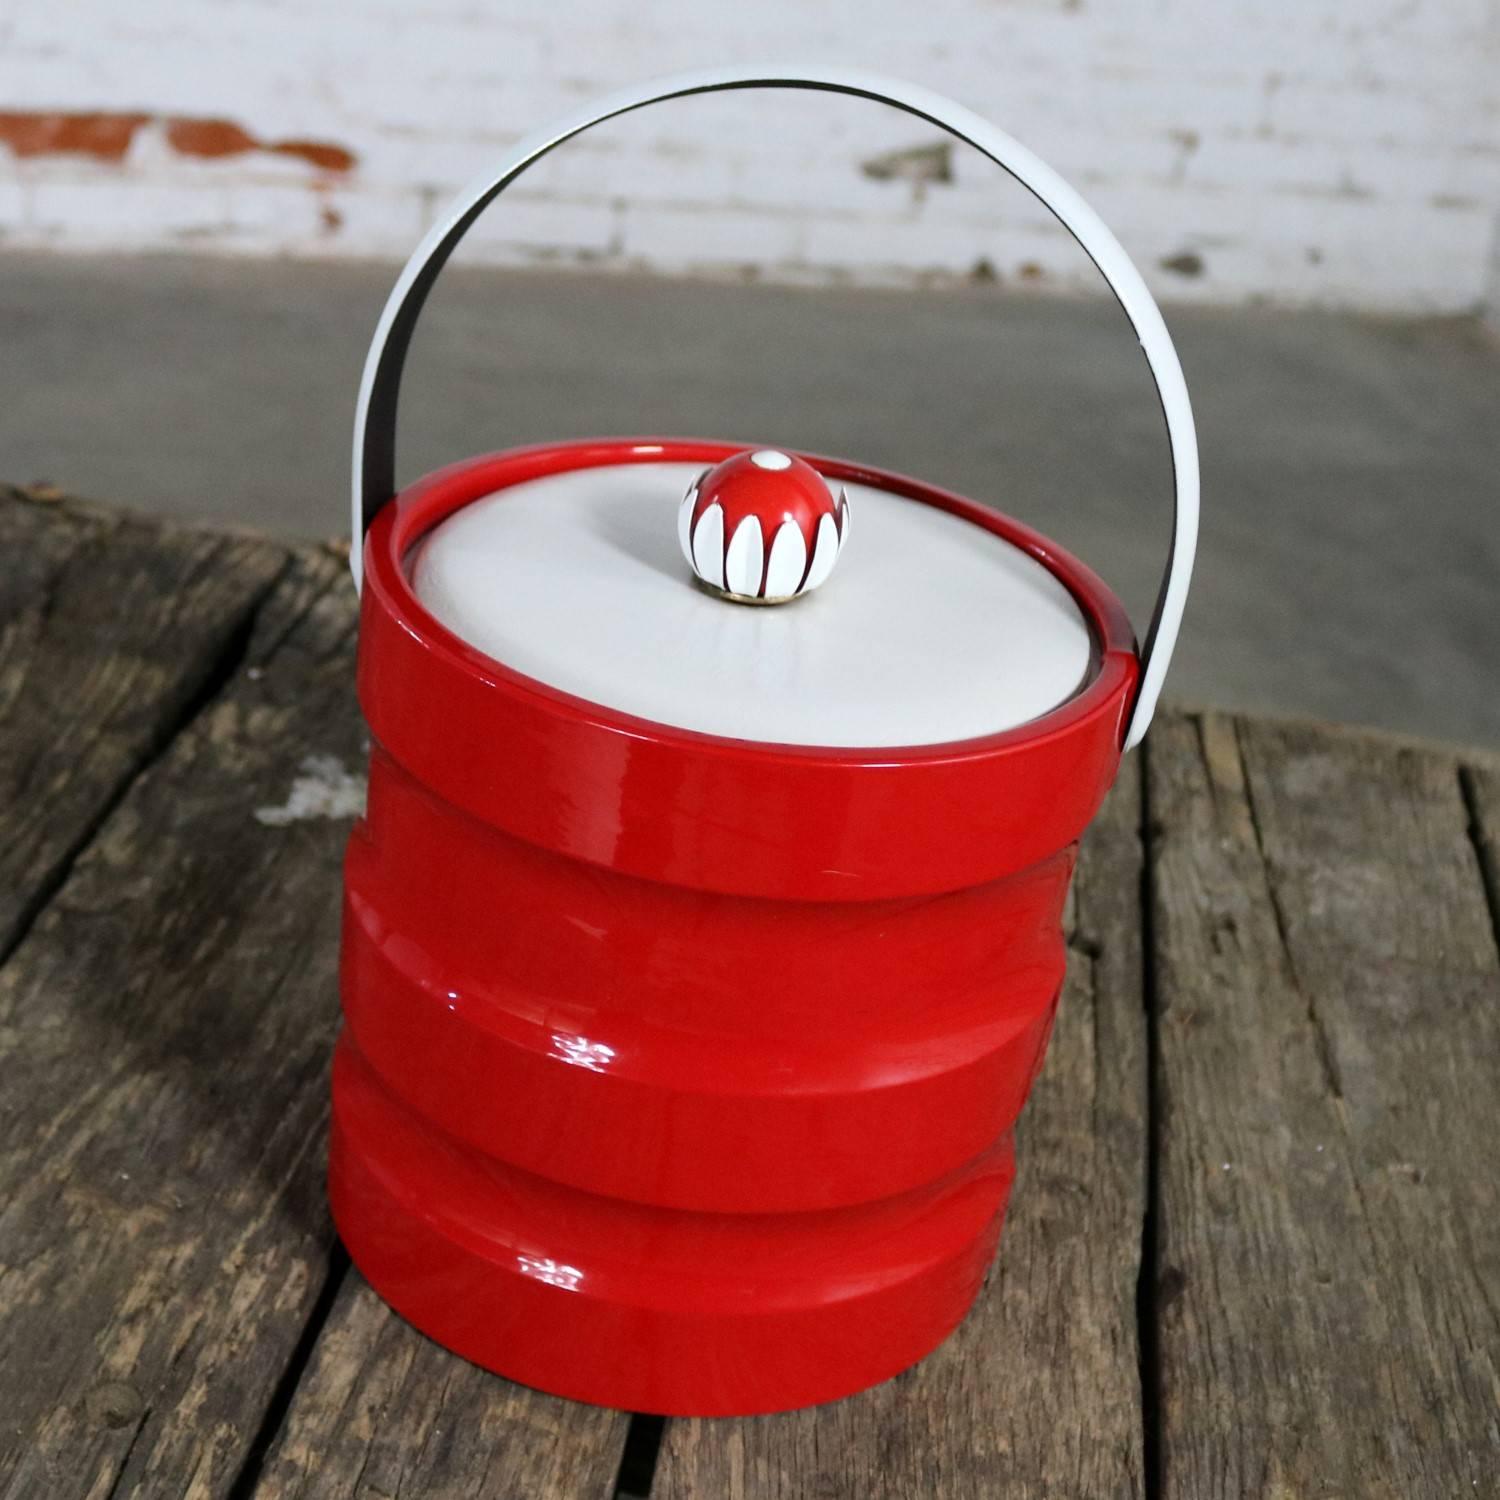 Fun vintage Mid-Century Modern red faux patent leather and white faux leather and plastic ribbed ice bucket with a mod red and white daisy knob. This fantastic ice bucket is in wonderful vintage condition, circa 1960s-1970s.

We just love this